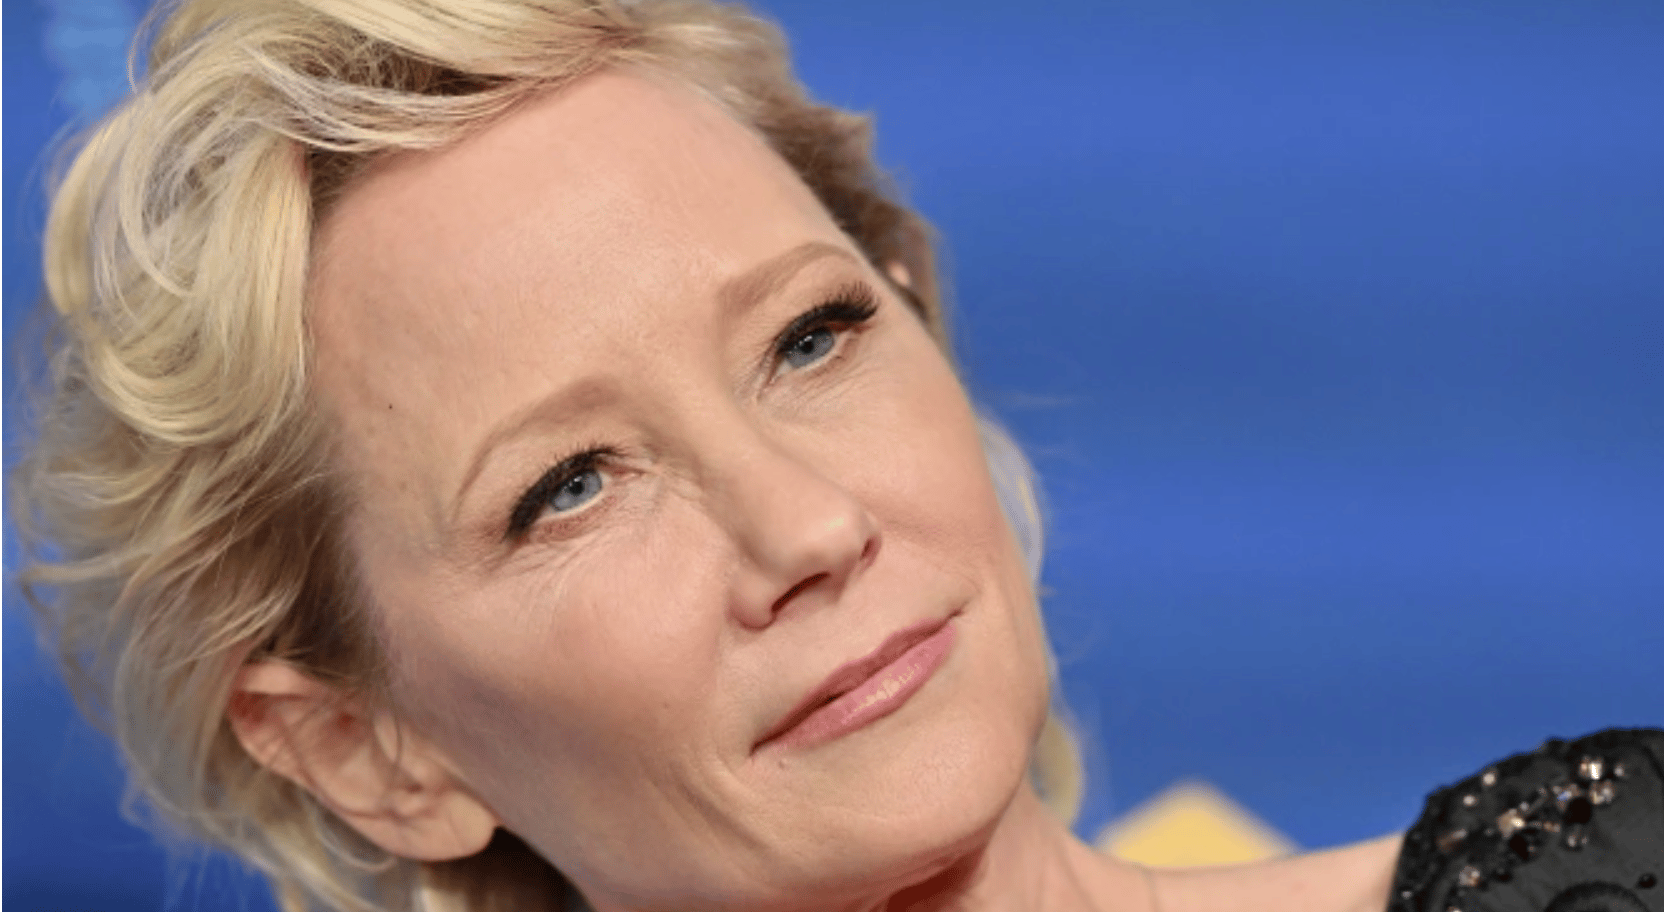 Report: Anne Heche In “Extremely Critical Condition”